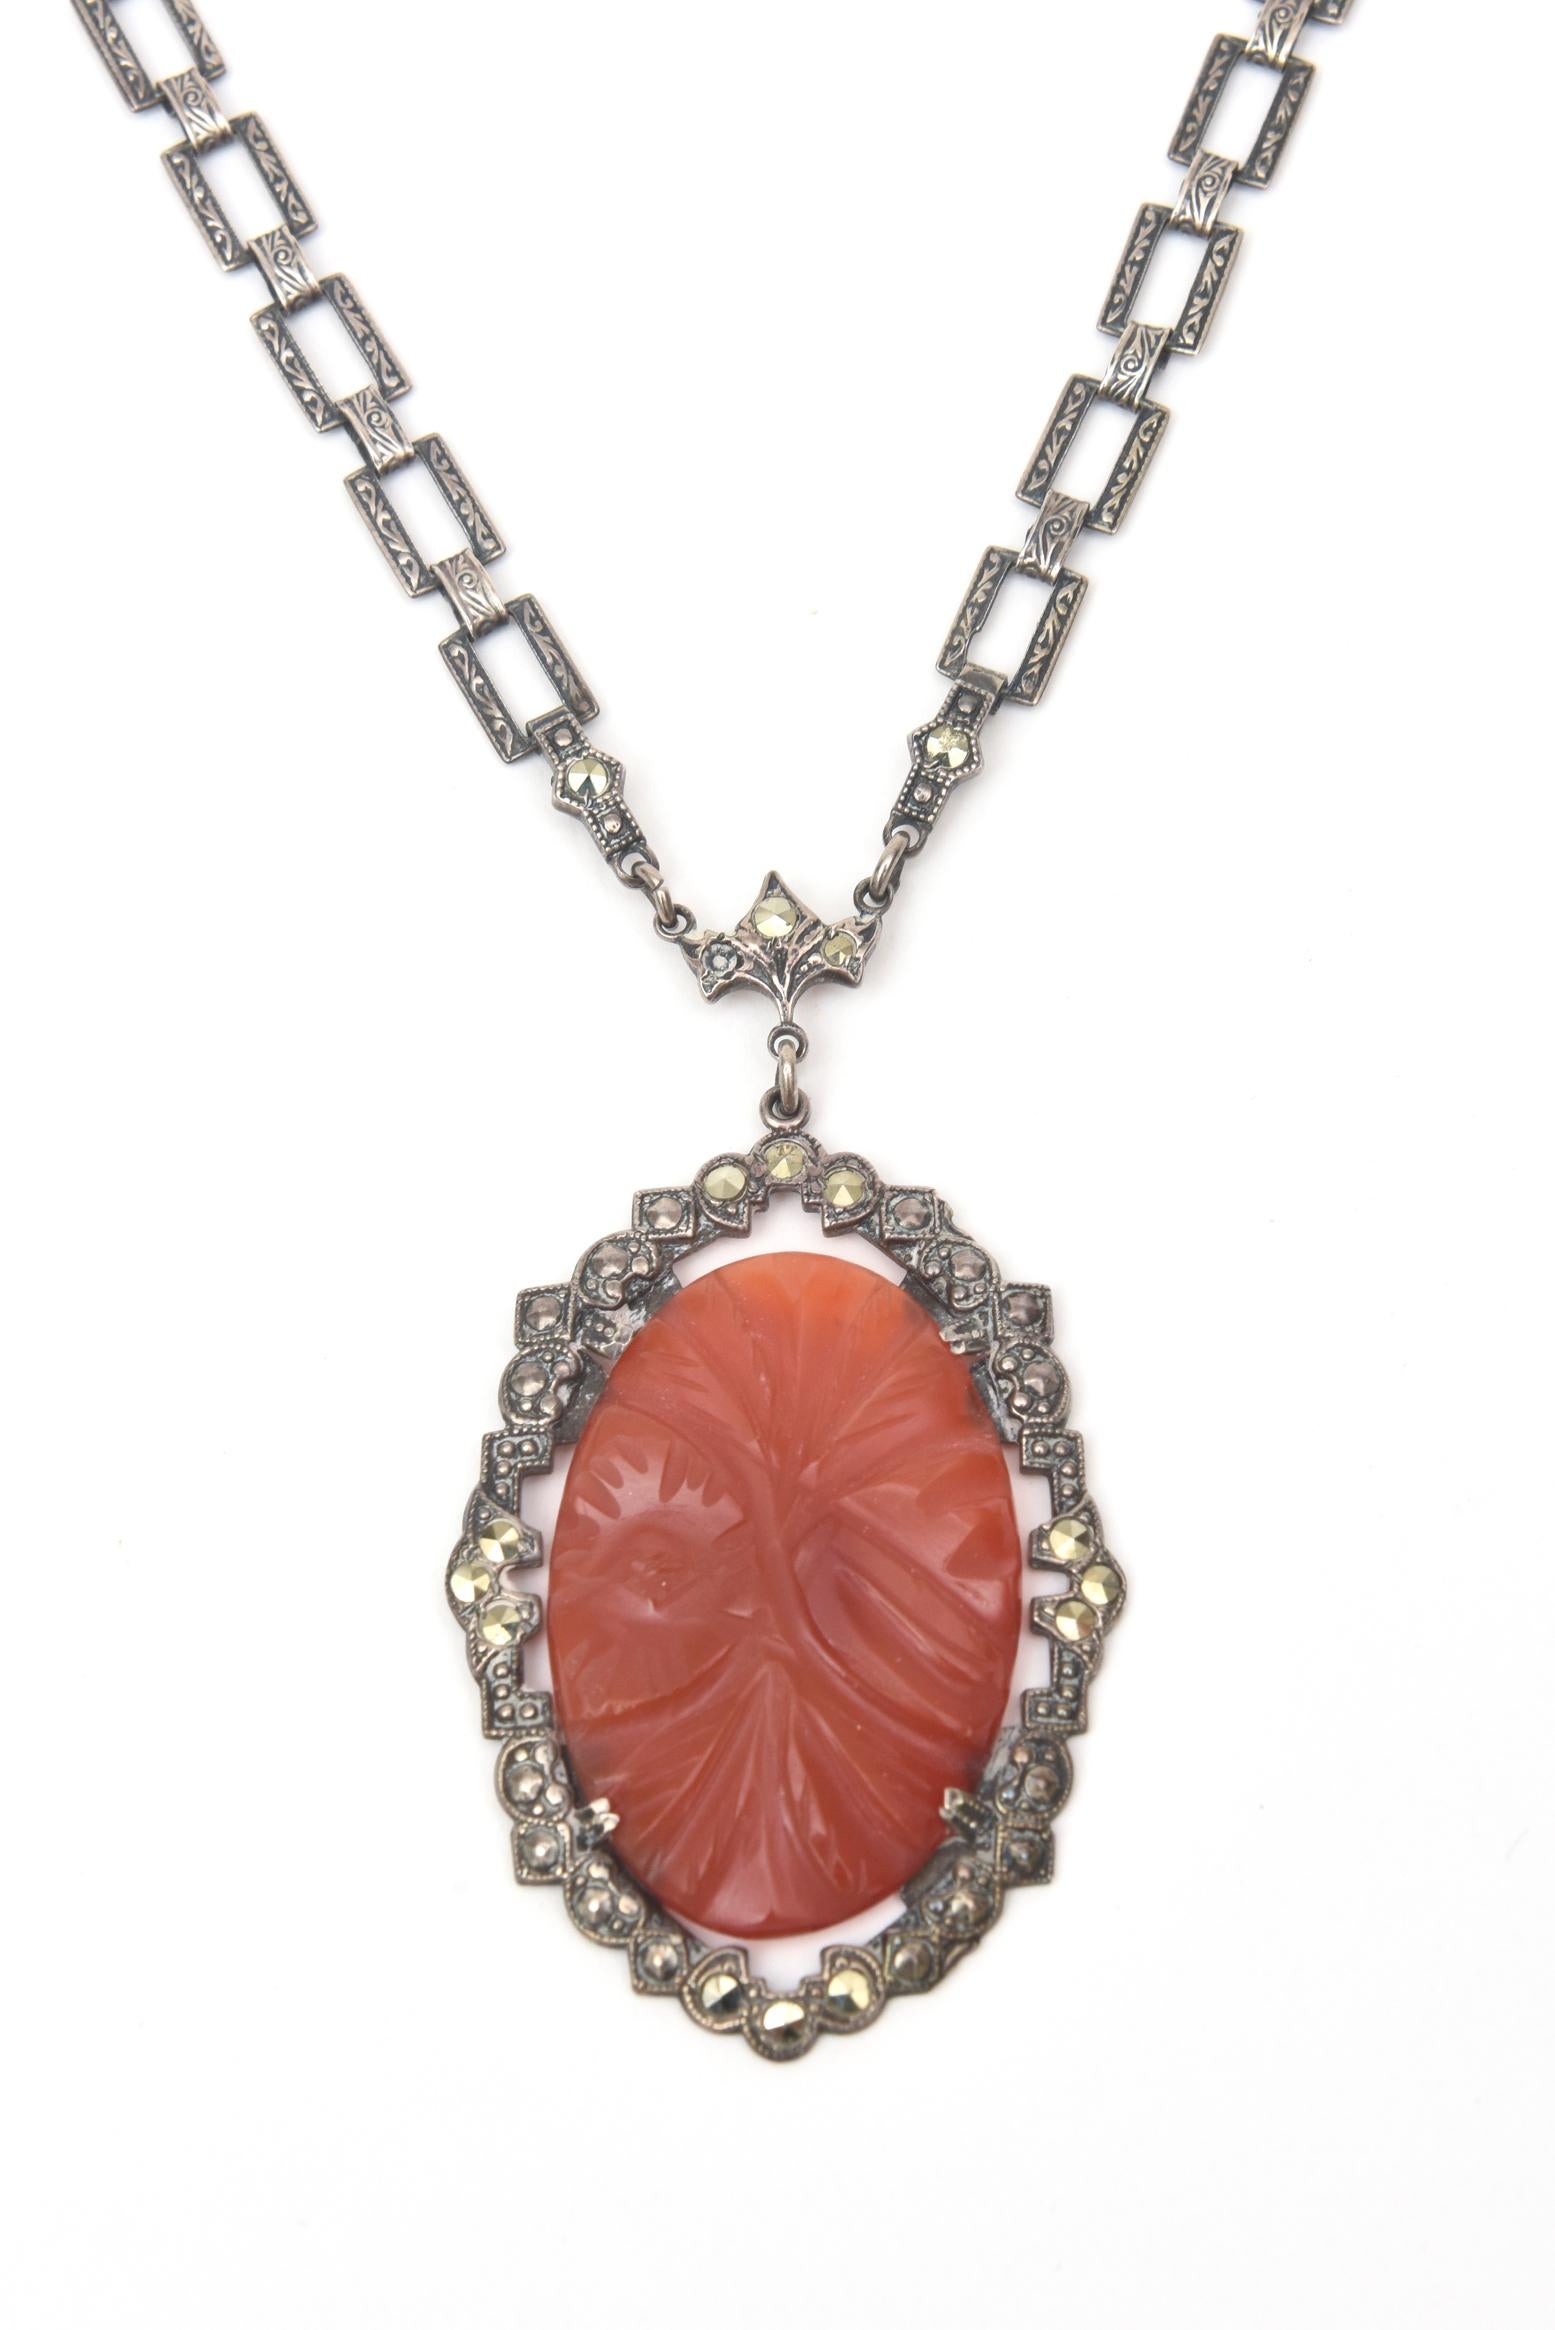 This lovely art deco vintage carnelian, sterling silver and marquisette necklace lays beautifully on the chest. The carnelian stone which is the pendant is surrounded by marquisettes. Could go day to evening. Please double check with us for exact